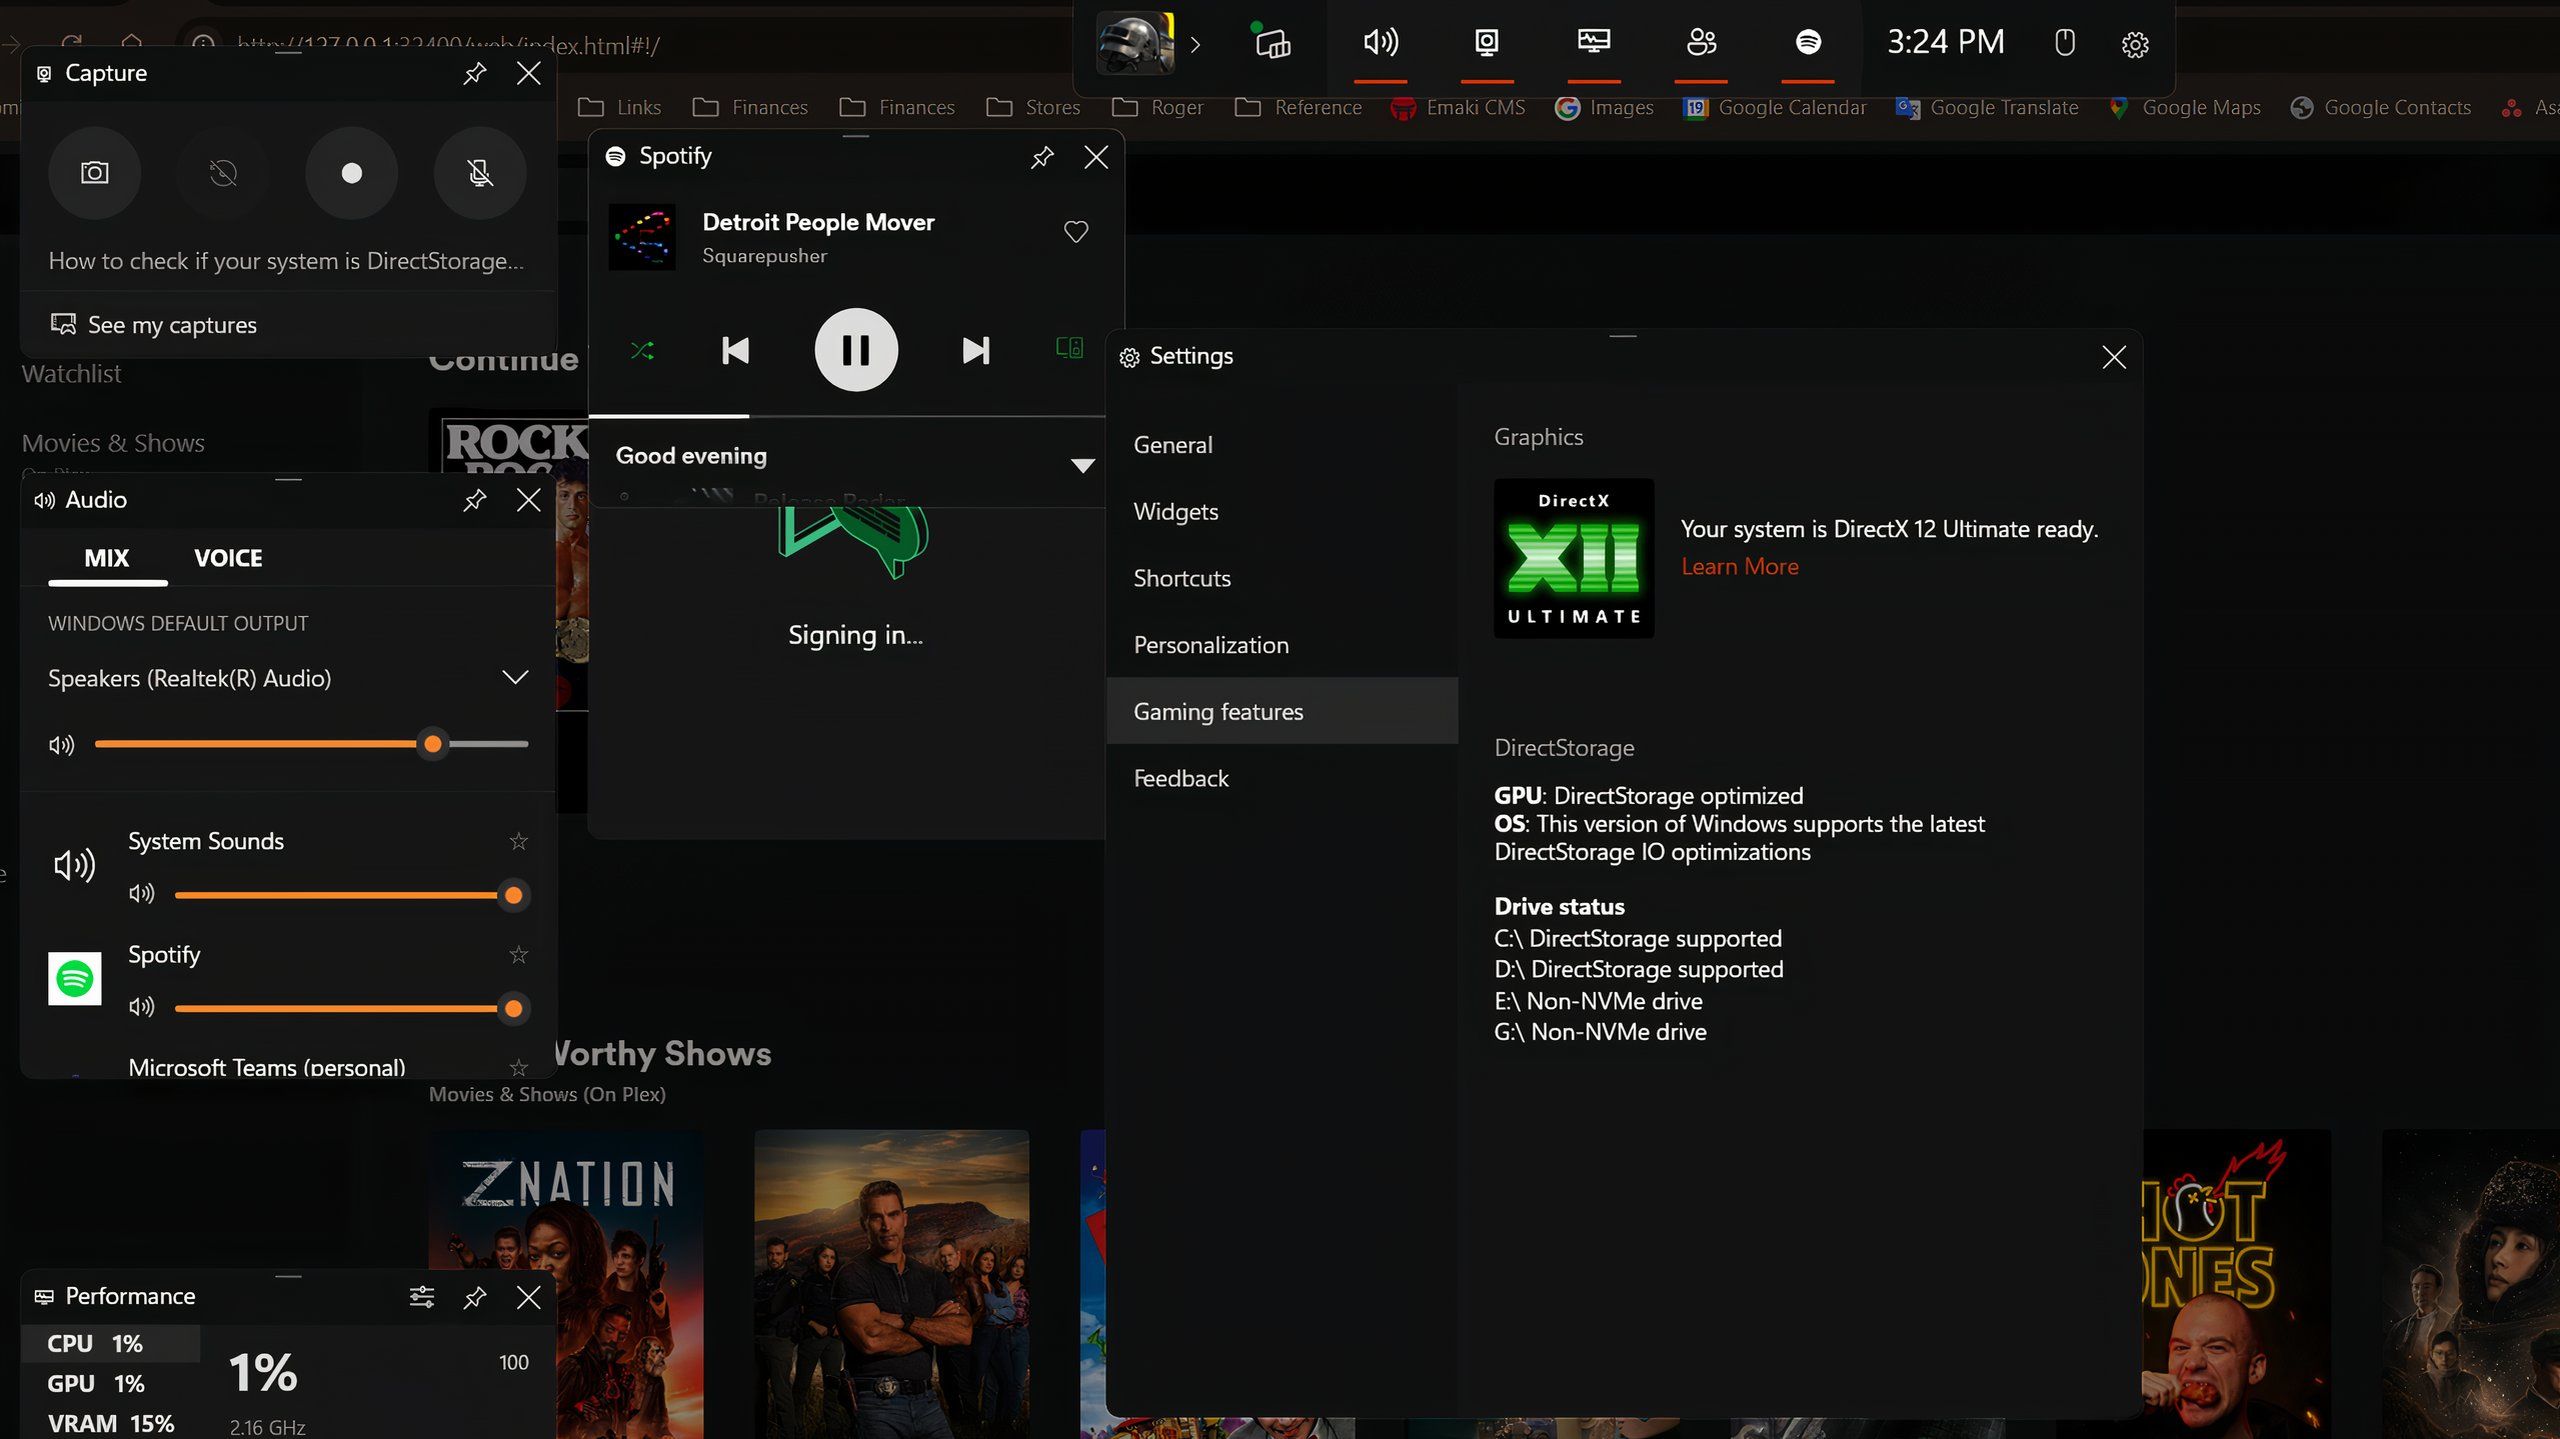 Gaming features in the Windows 11 Game Bar settings.